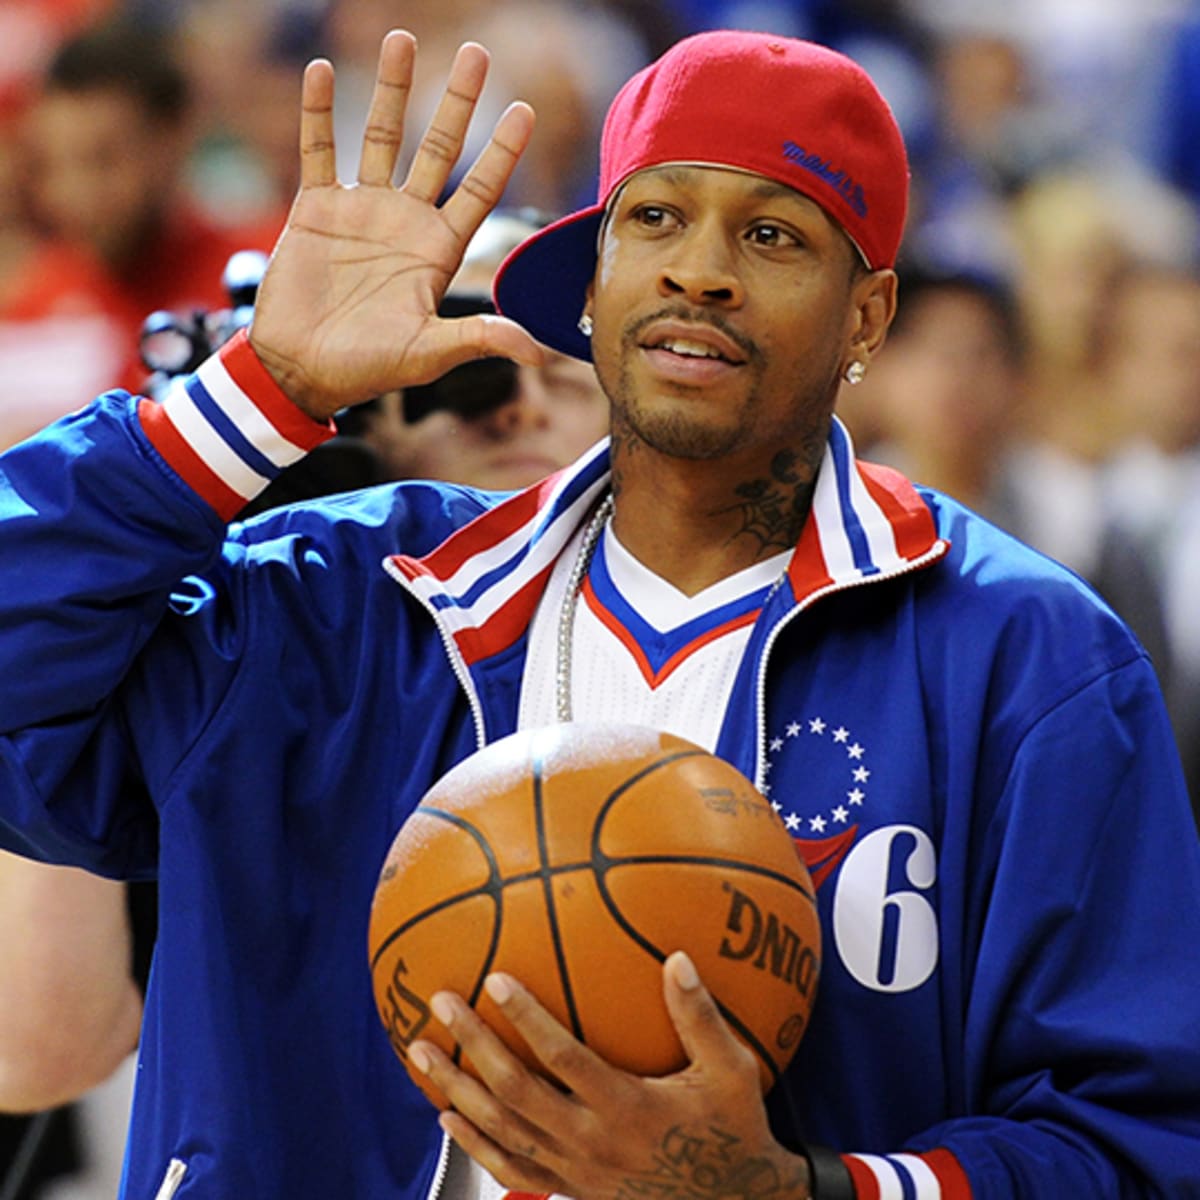 Do any NBA players wear Reebok? Shaquille O'Neal, Allen Iverson